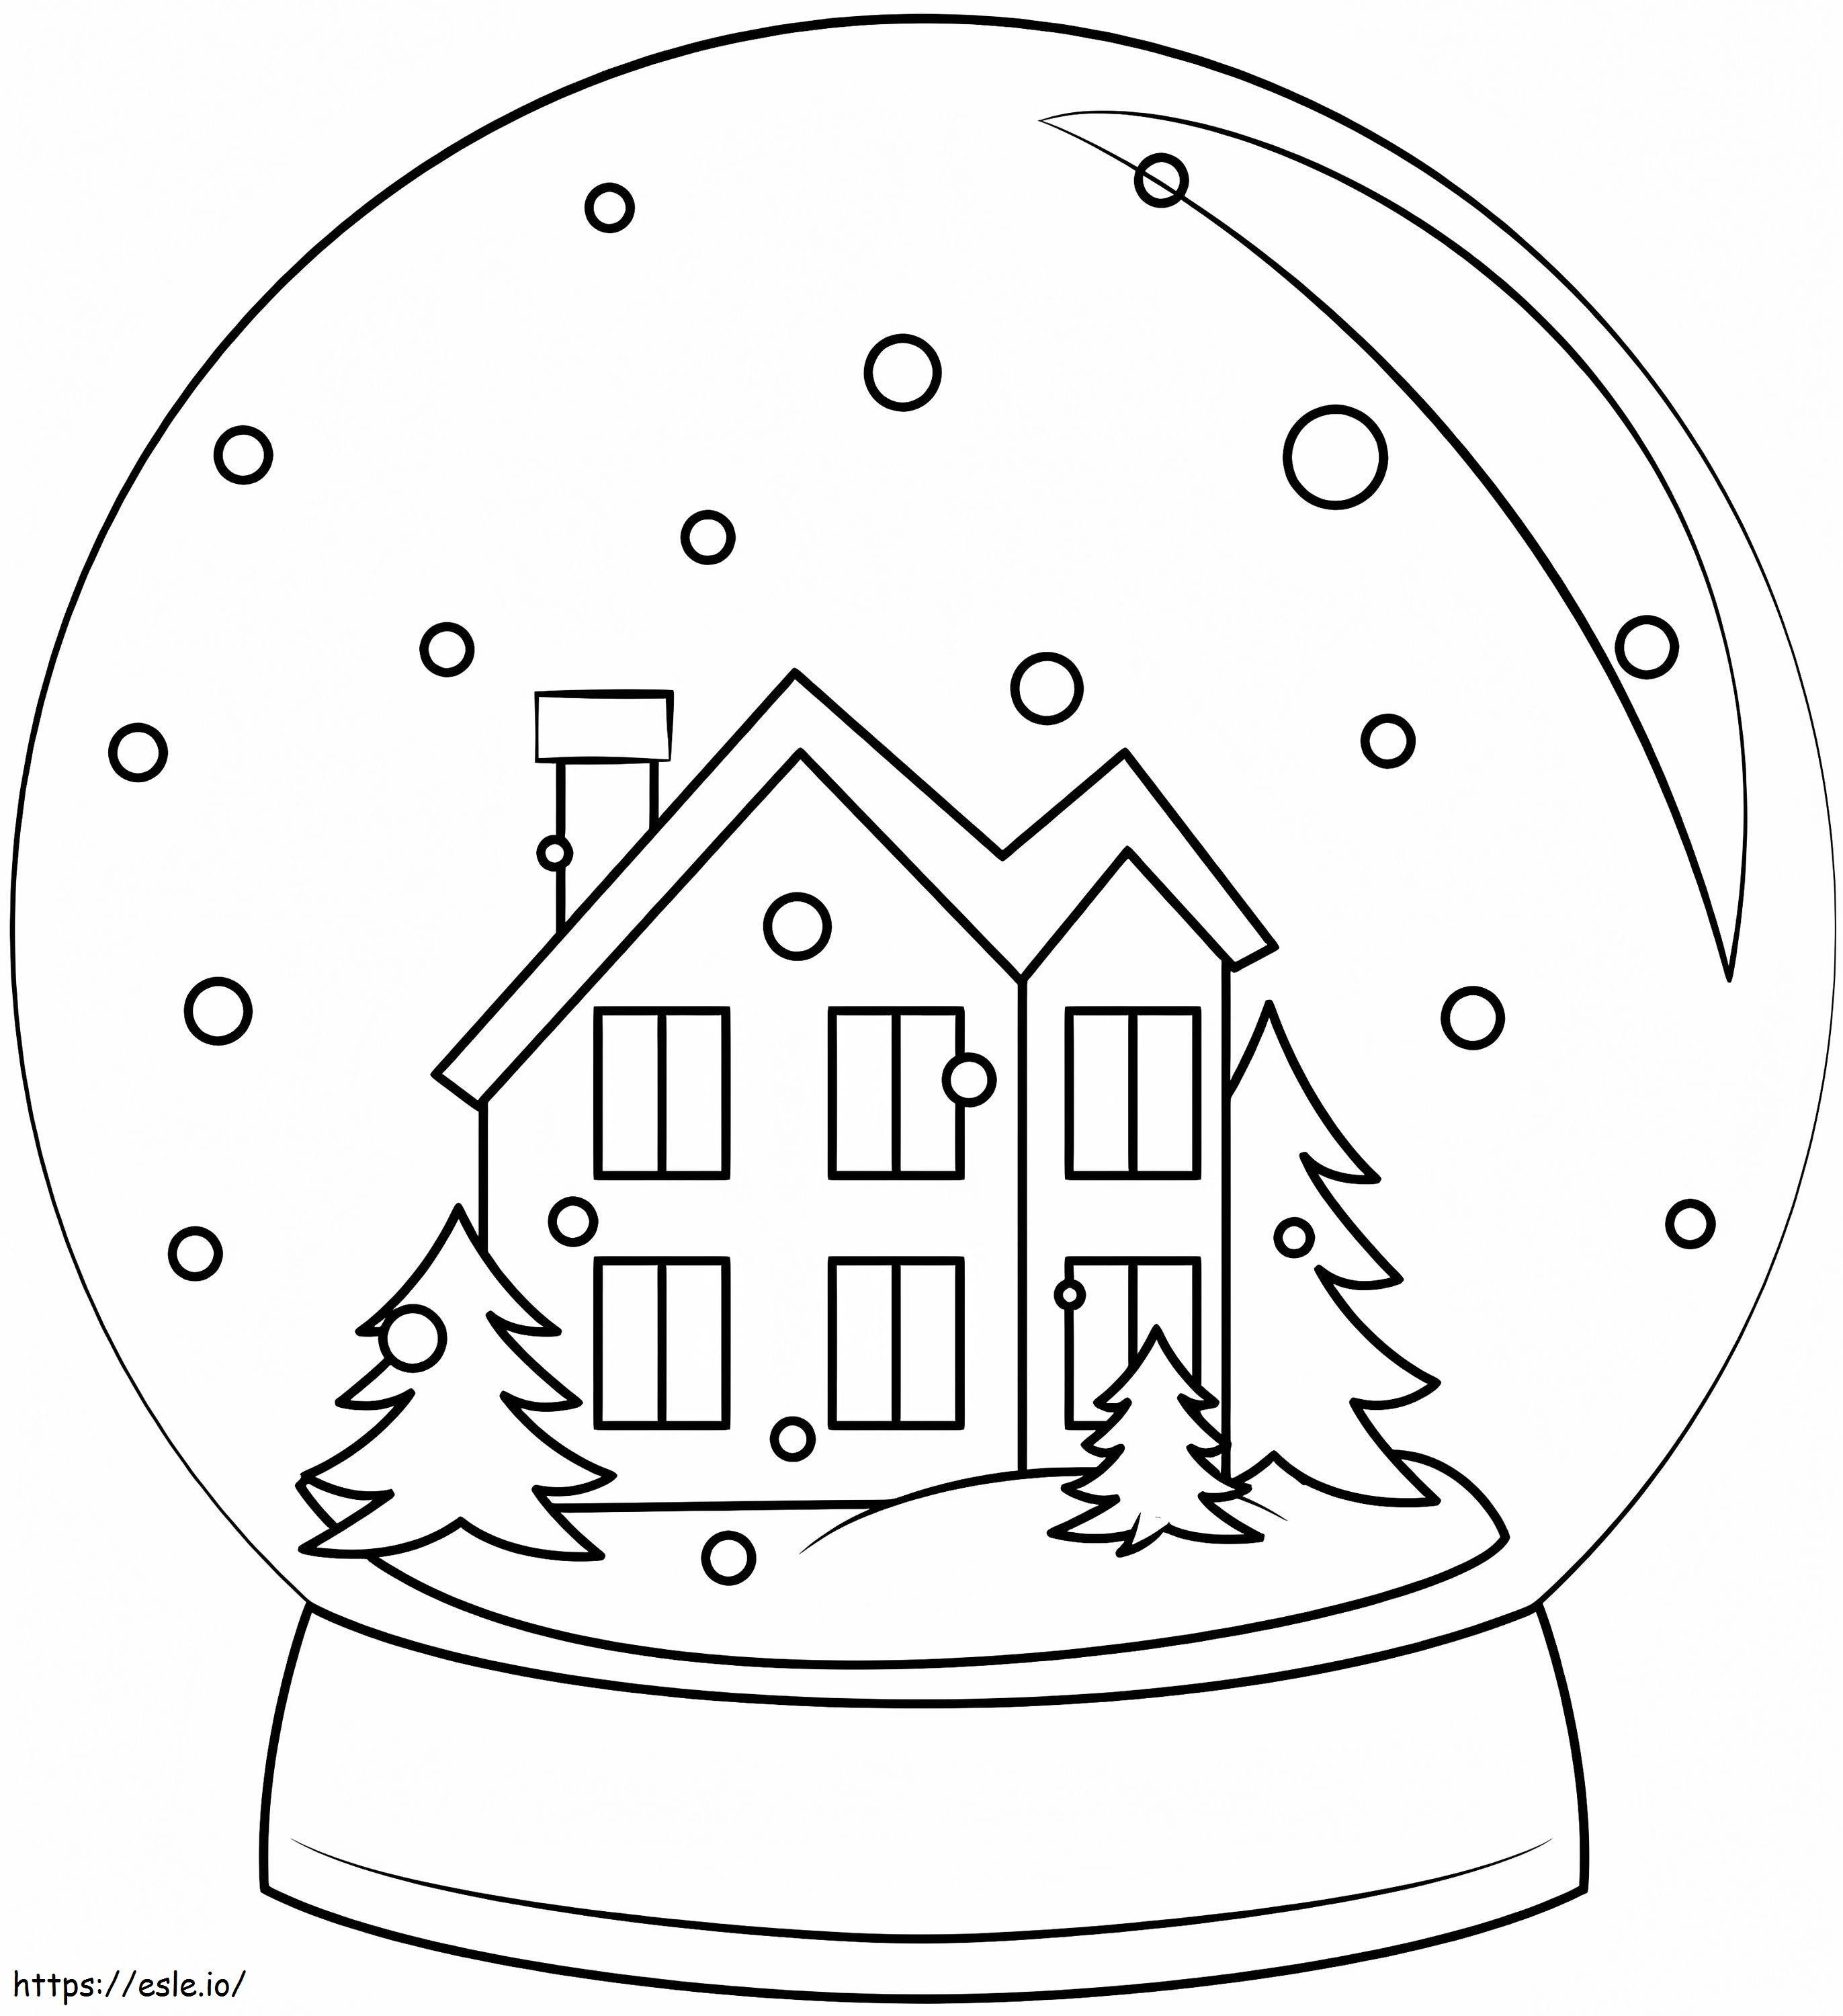 Winter Snow Globe coloring page